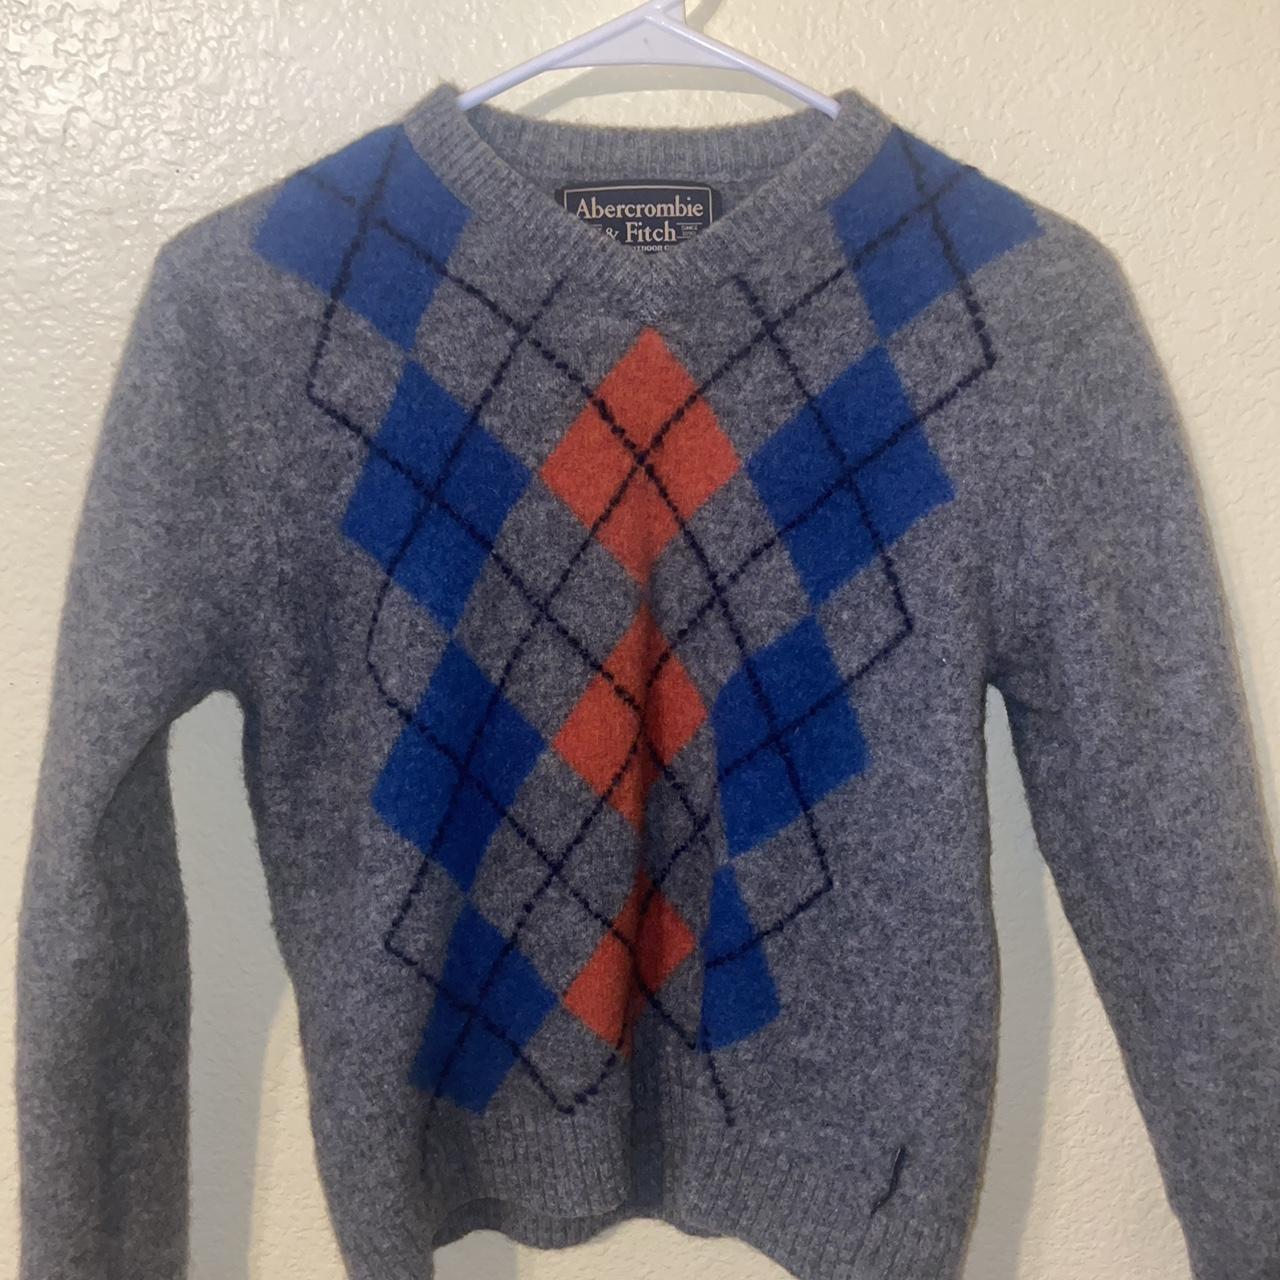 Abercrombie & Fitch Women's Grey and Blue Jumper | Depop